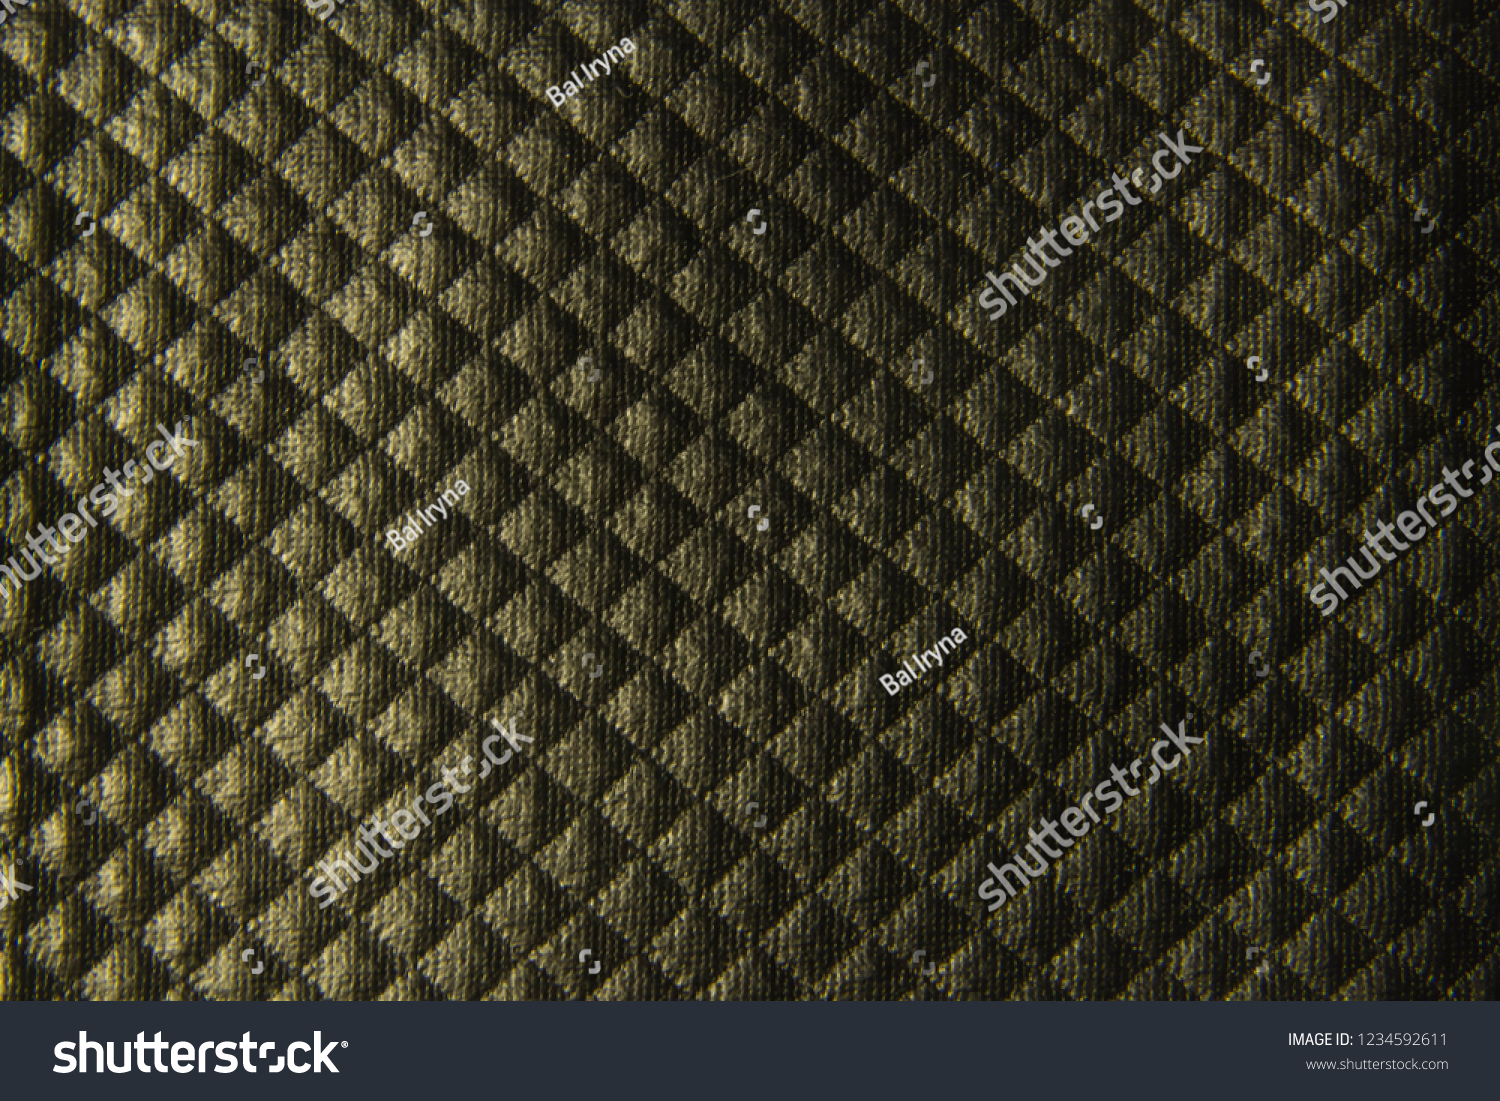 Black textured leather background with rhombuses closeup #1234592611